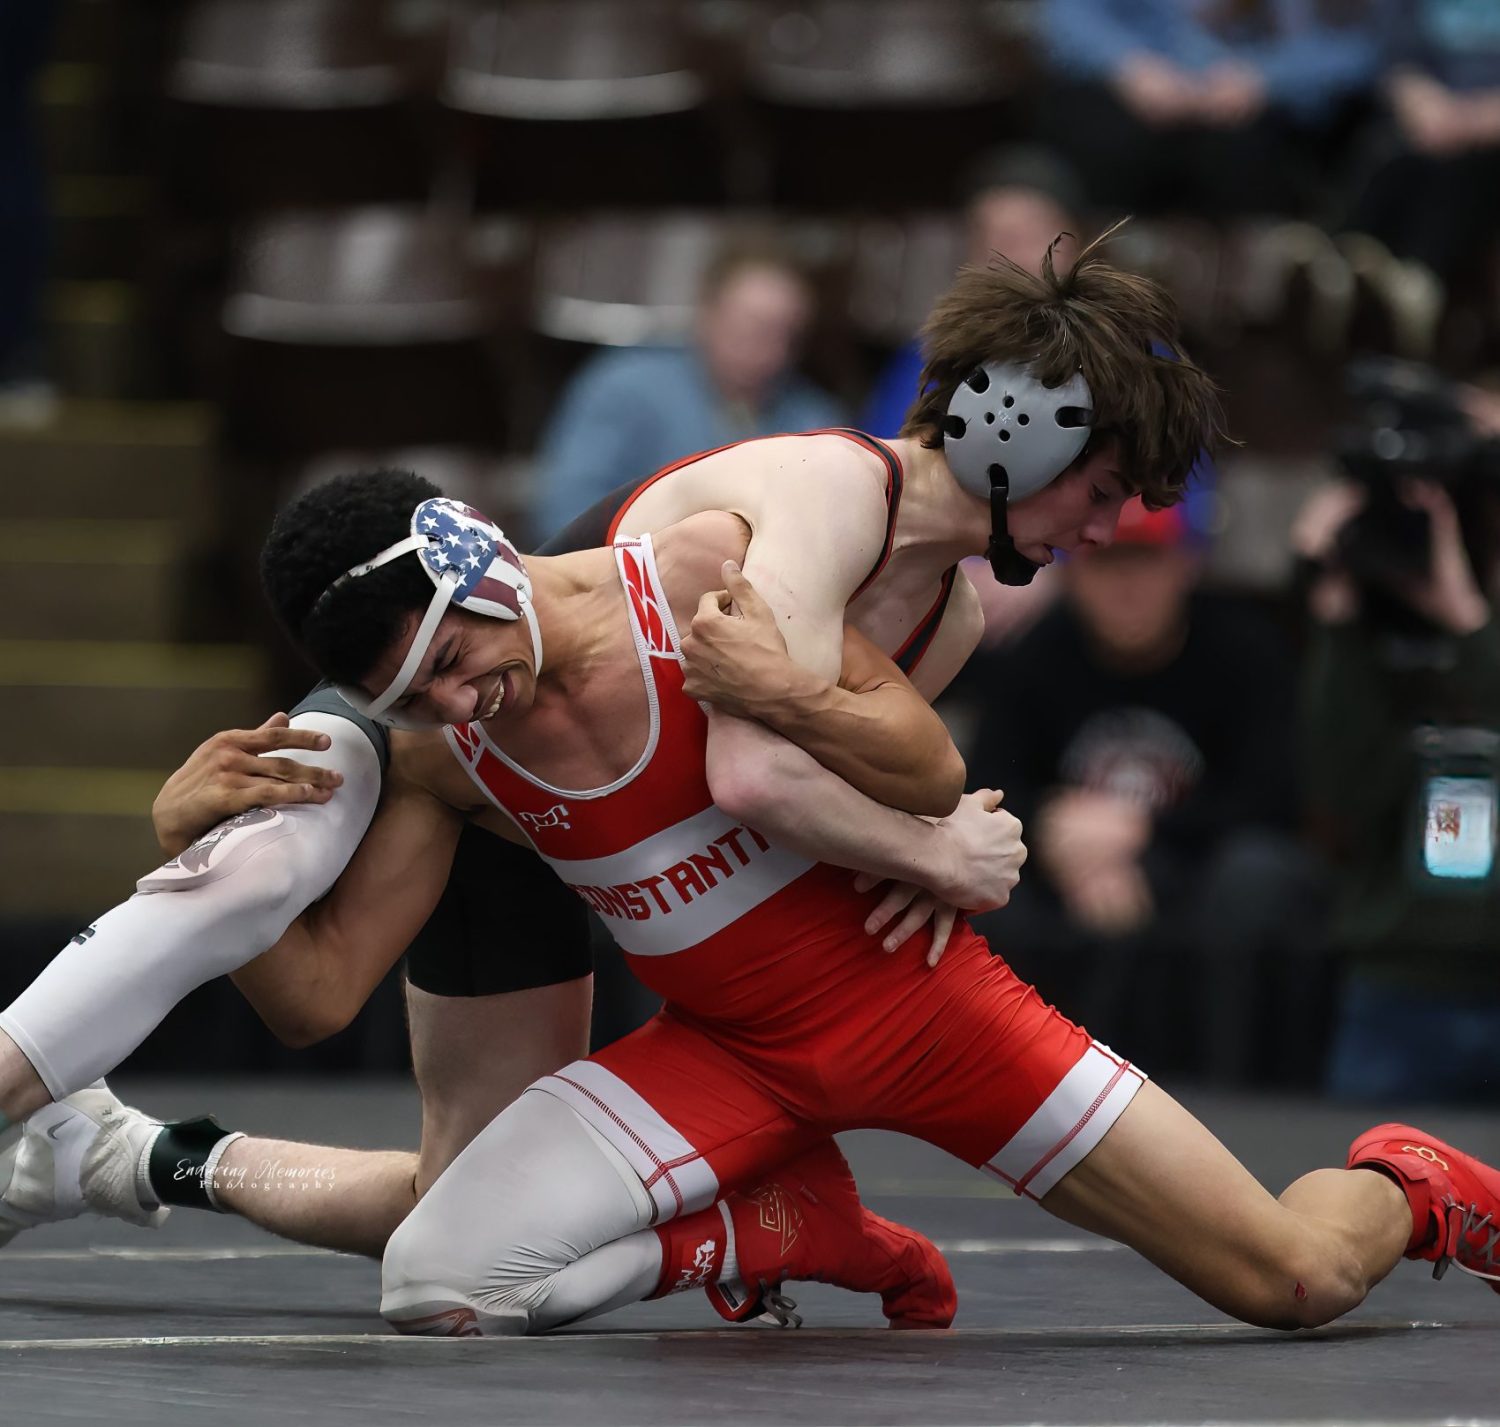 Whitehall wrestlers dominate, earn Division 3 semifinal berth; Hart falls in tight match against Constantine